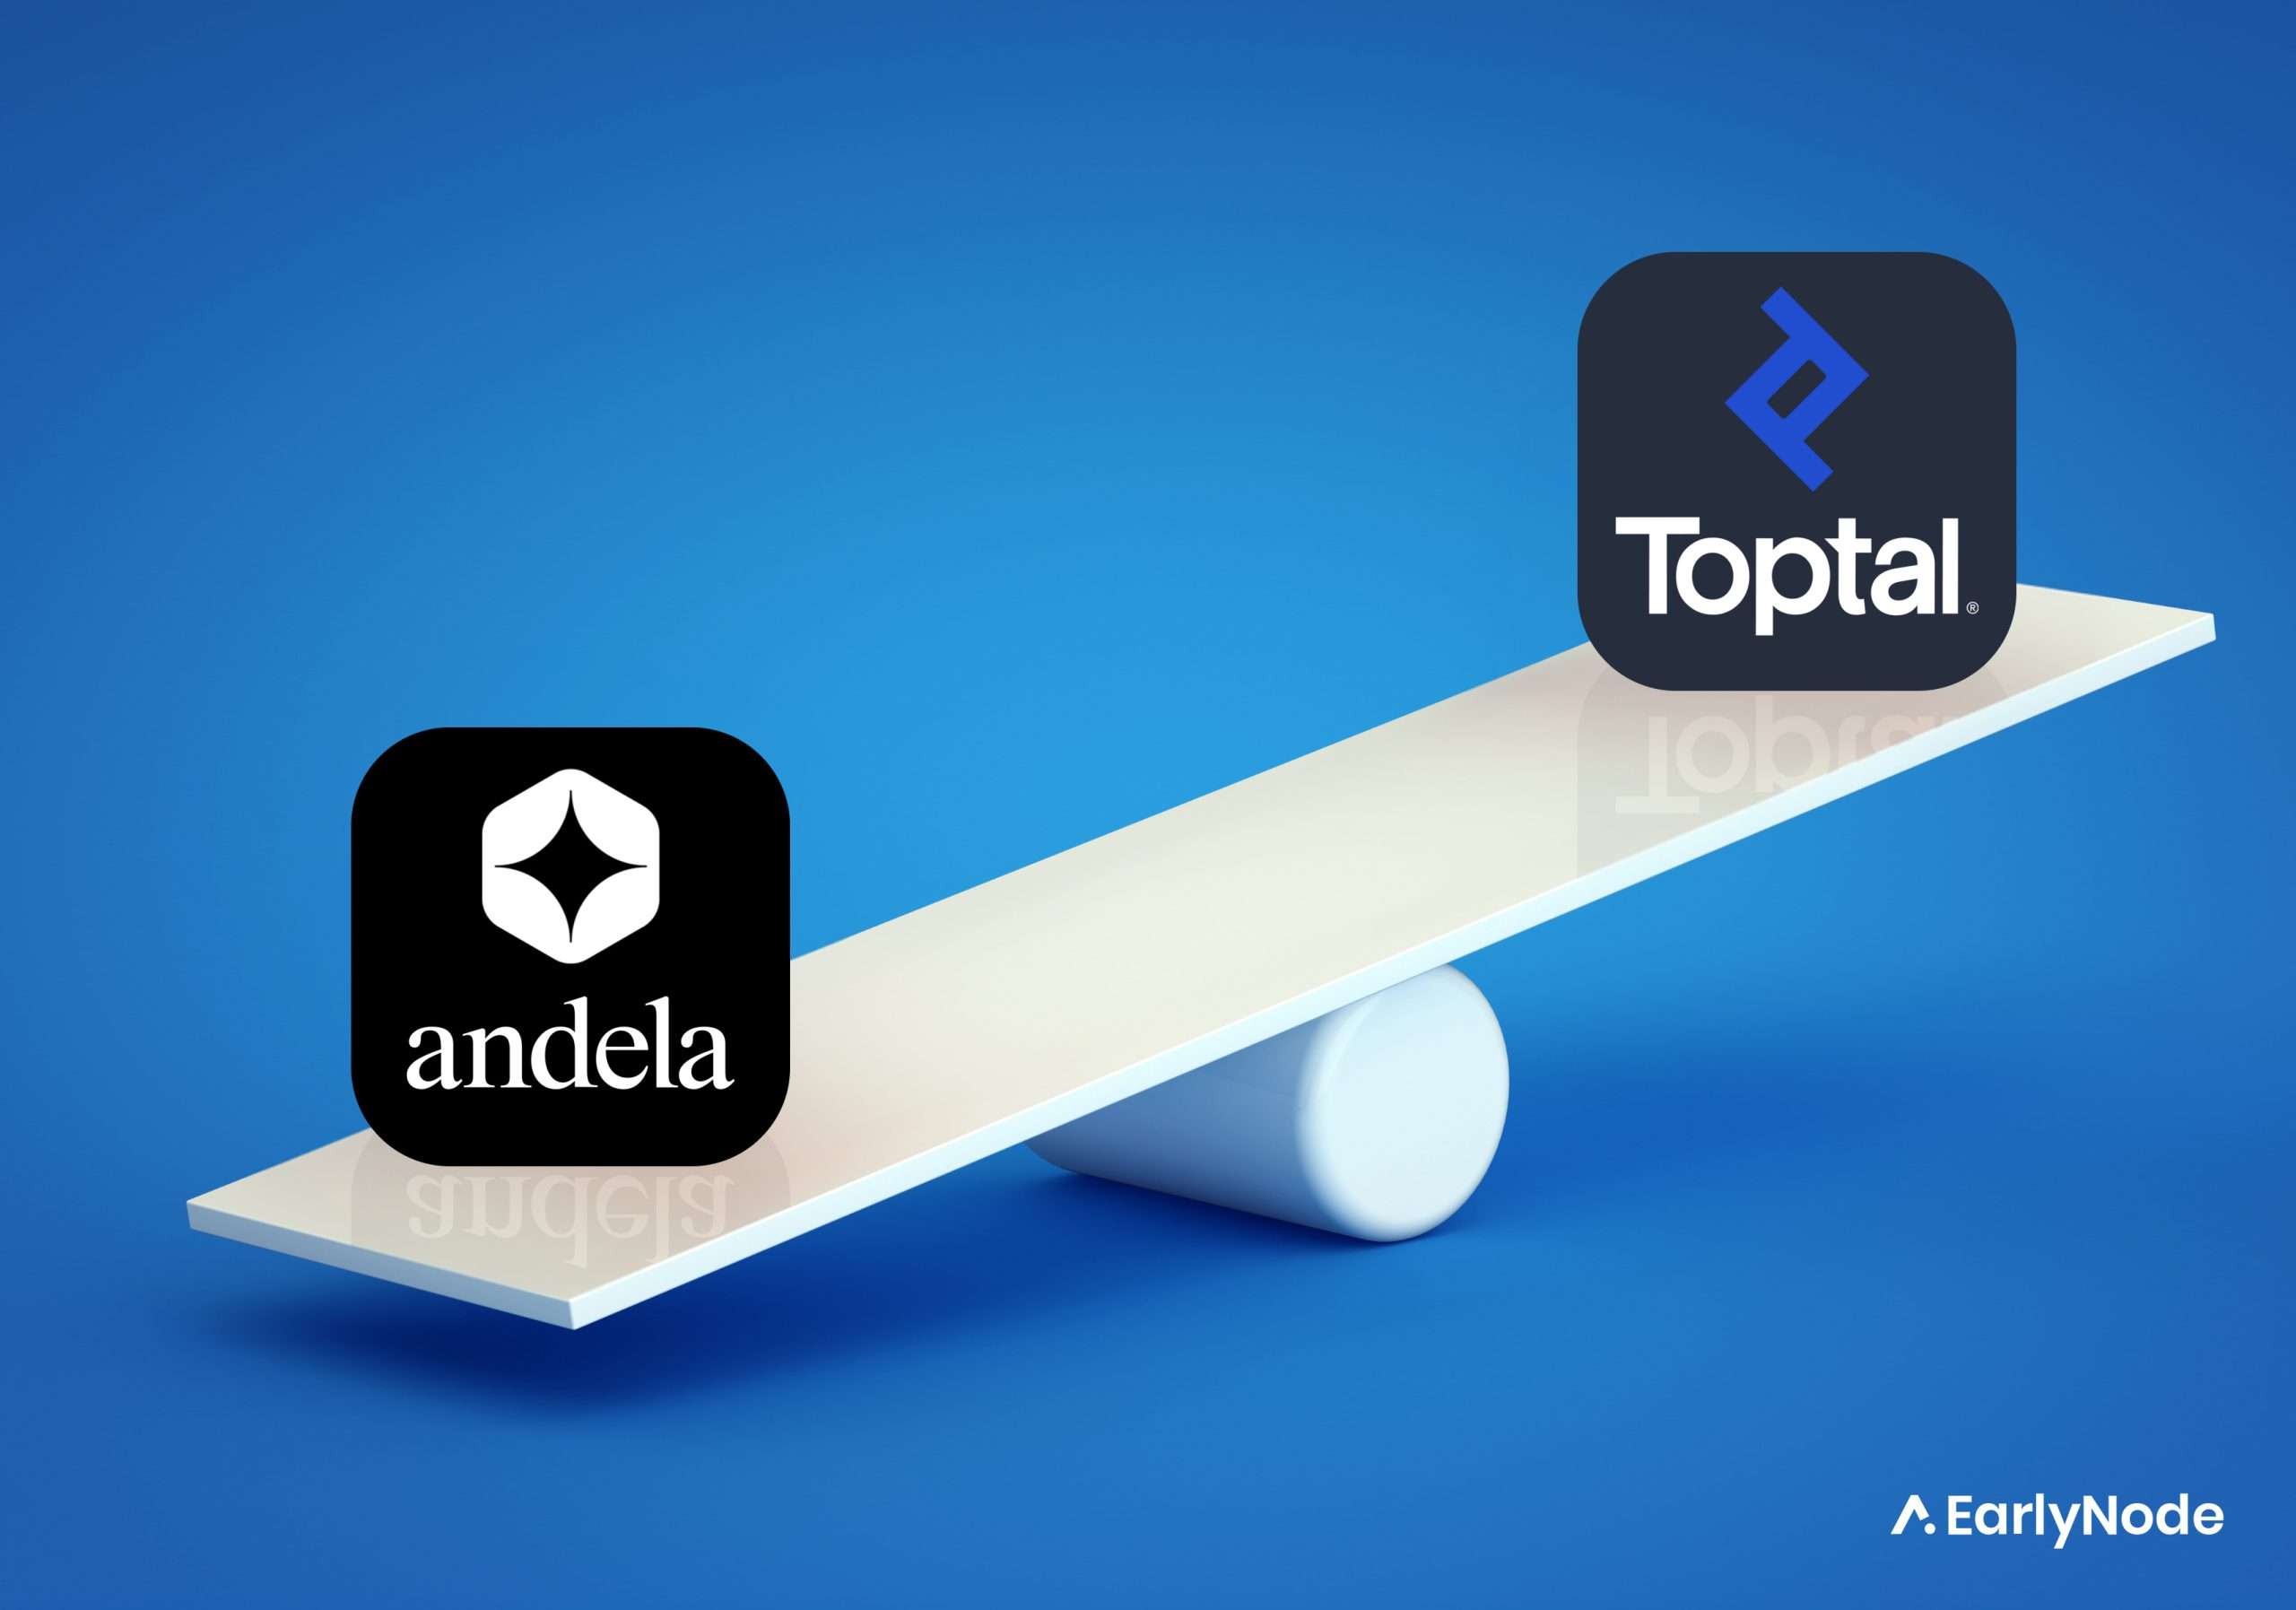 Andela vs. Toptal: Which is better for hiring remote developers?